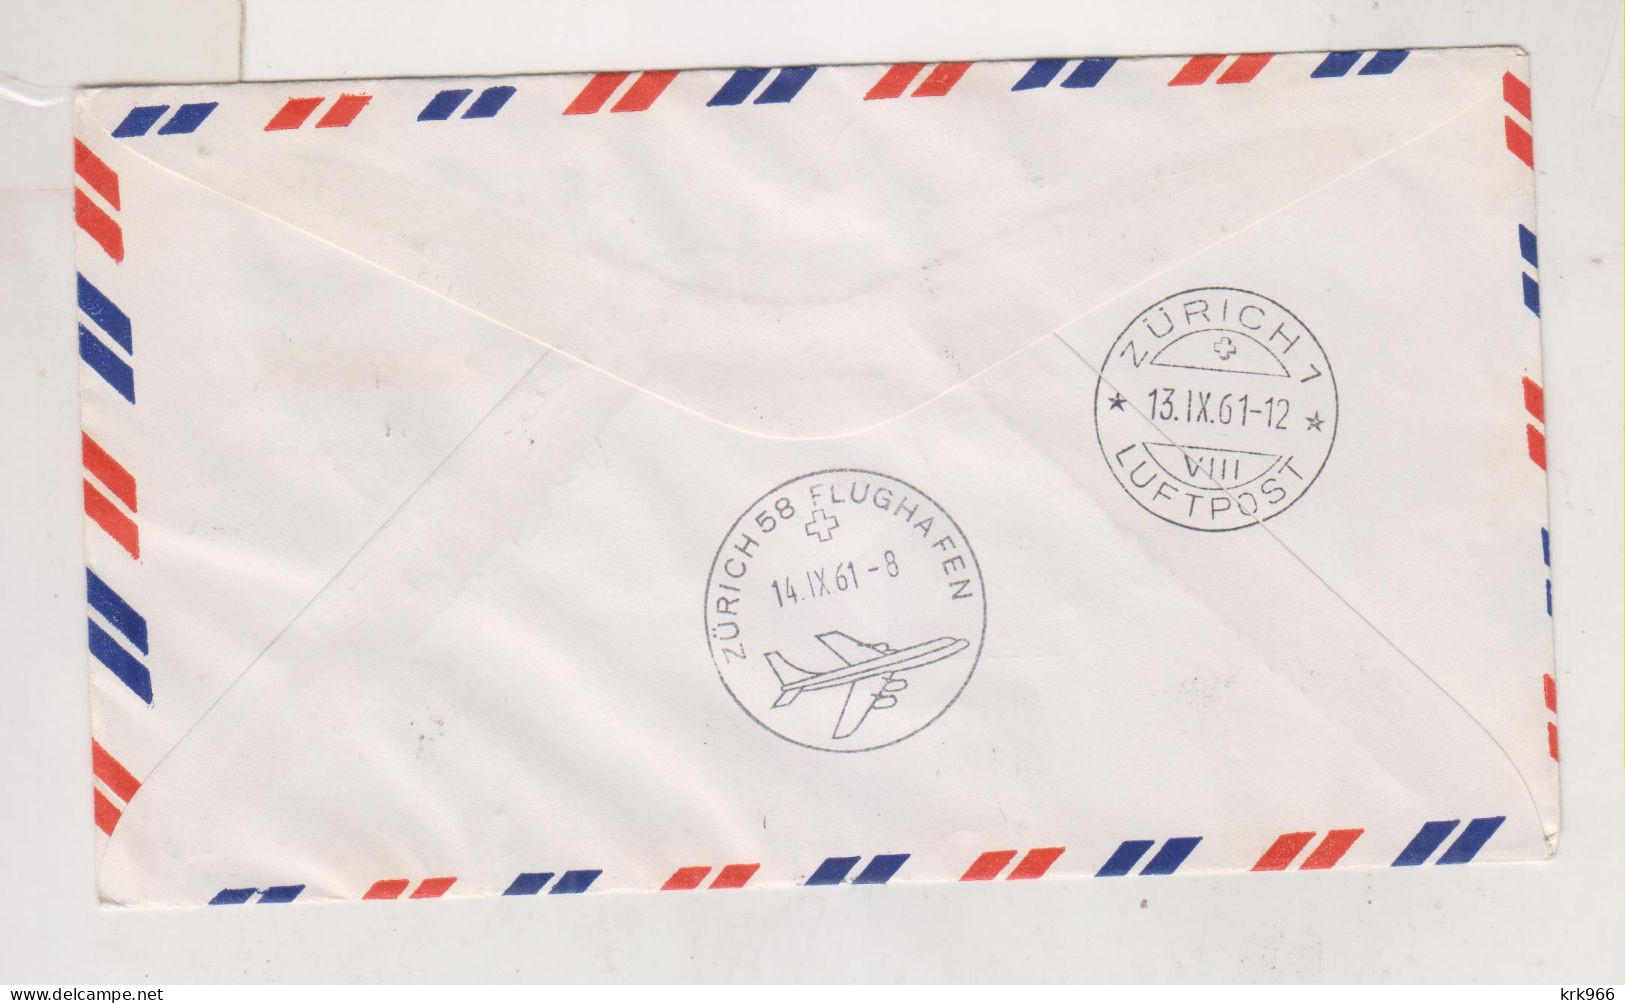 INDIA, 1961 Airmail Cover To Switzerland - Airmail